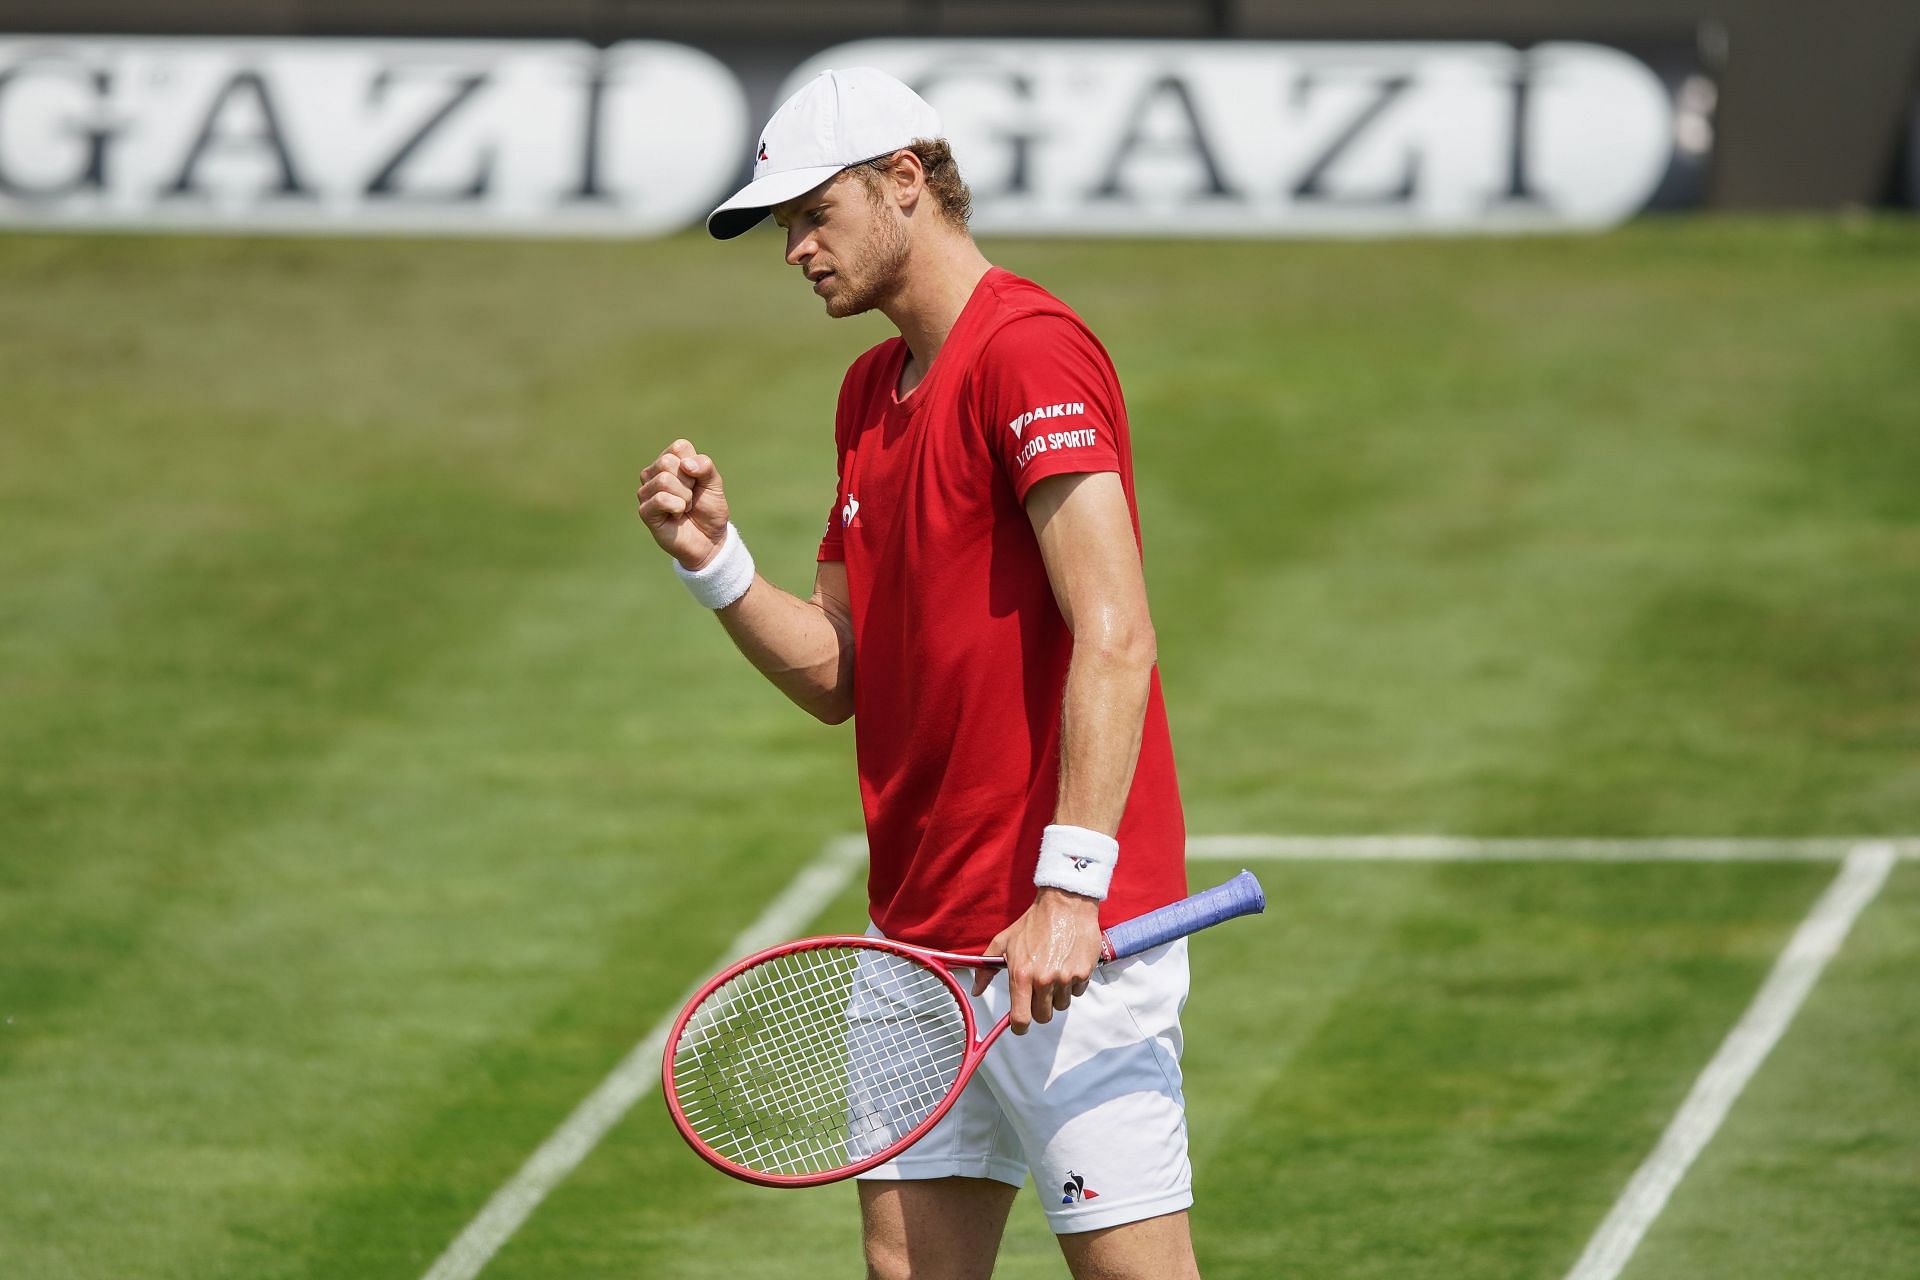 Hanfmann at the 2021 MercedesCup.